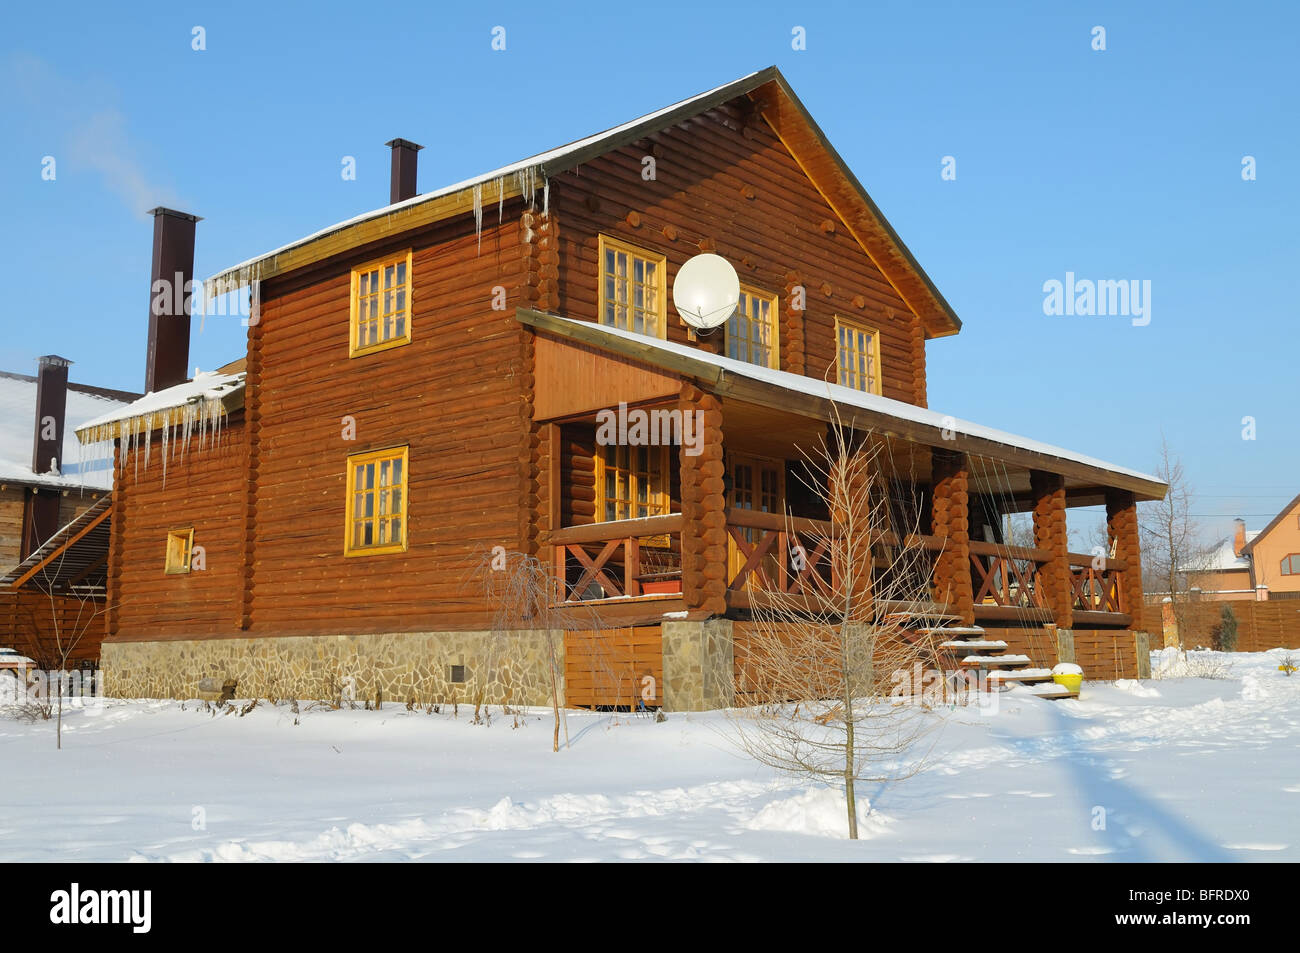 Wooden house in the winter Stock Photo